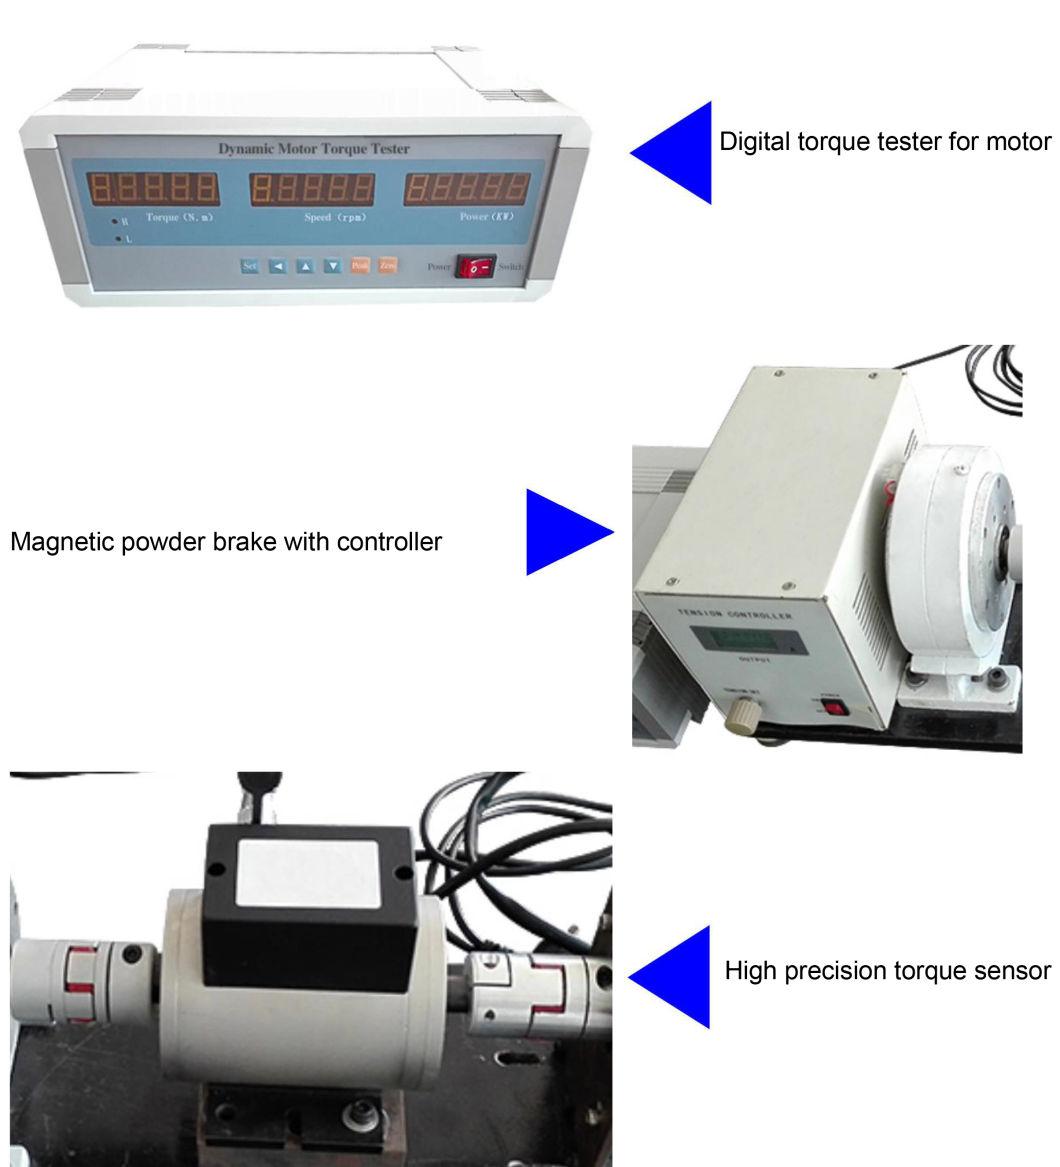 High Precision Motor Dynamic Torque Tester Meter with Magnetic Powder Brake